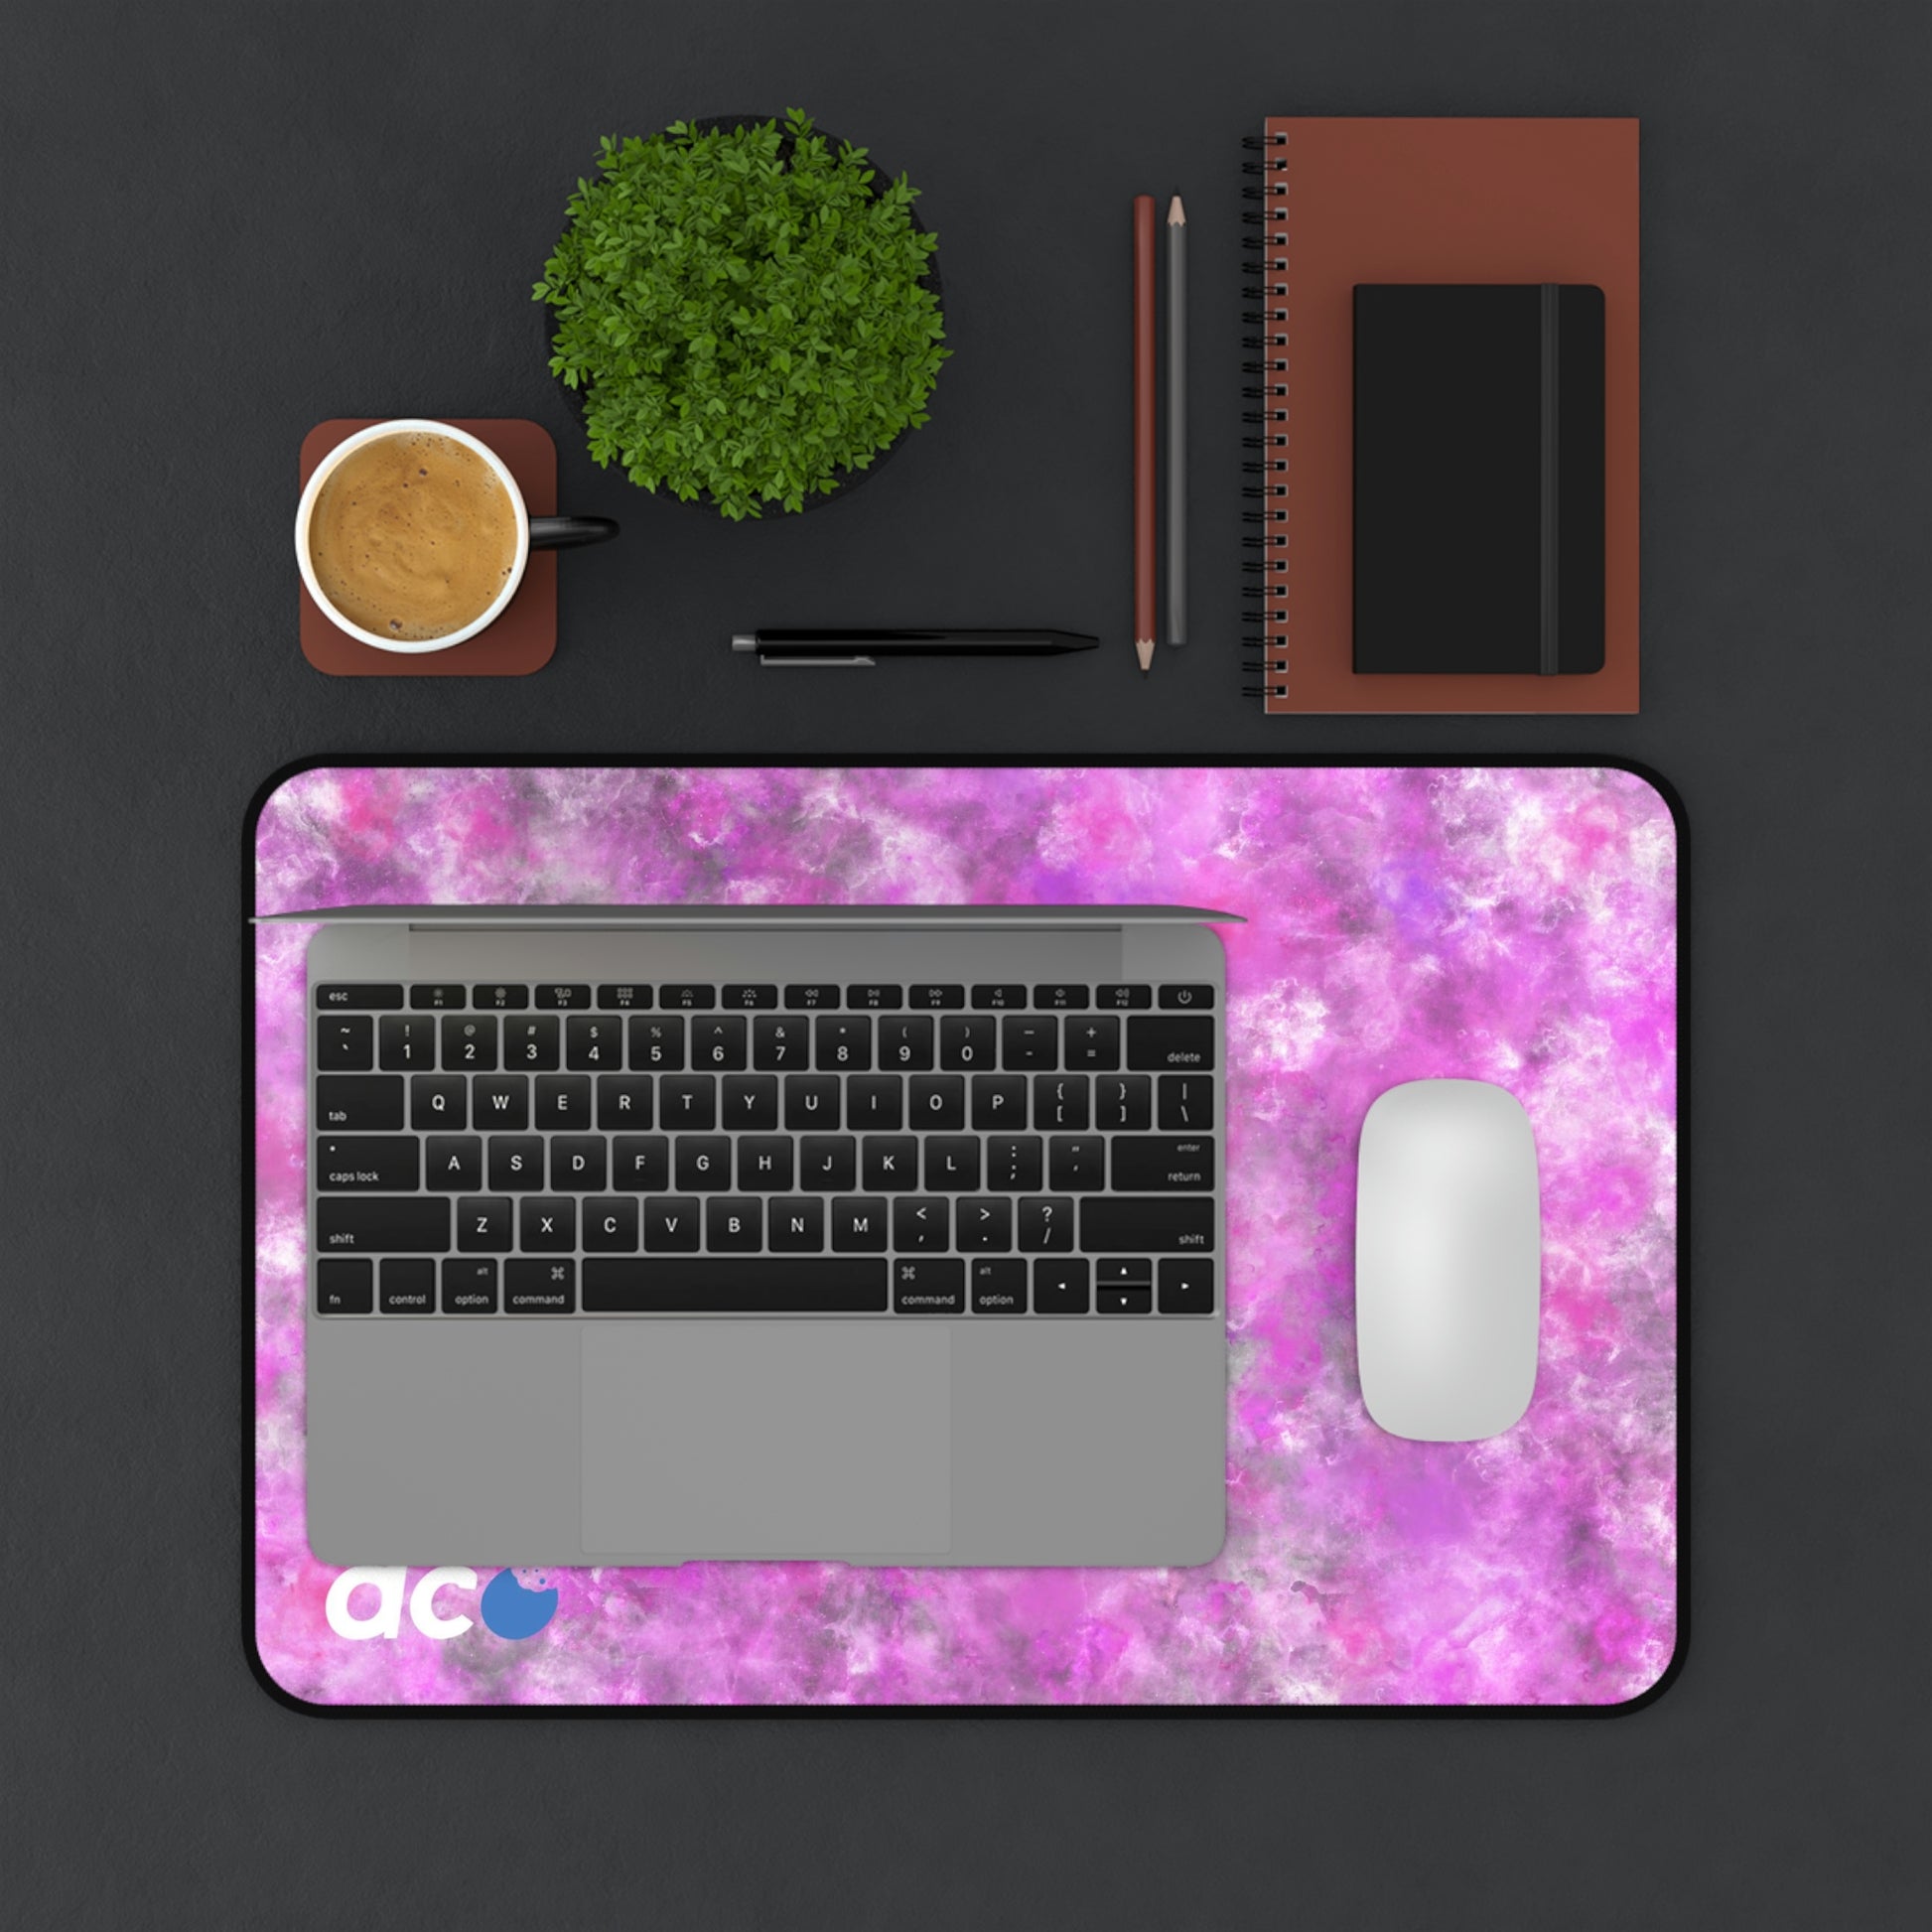 A 12" x 18" desk mat with a fluffy mix of pink, white, and gray. A laptop and mouse sit on top of it.